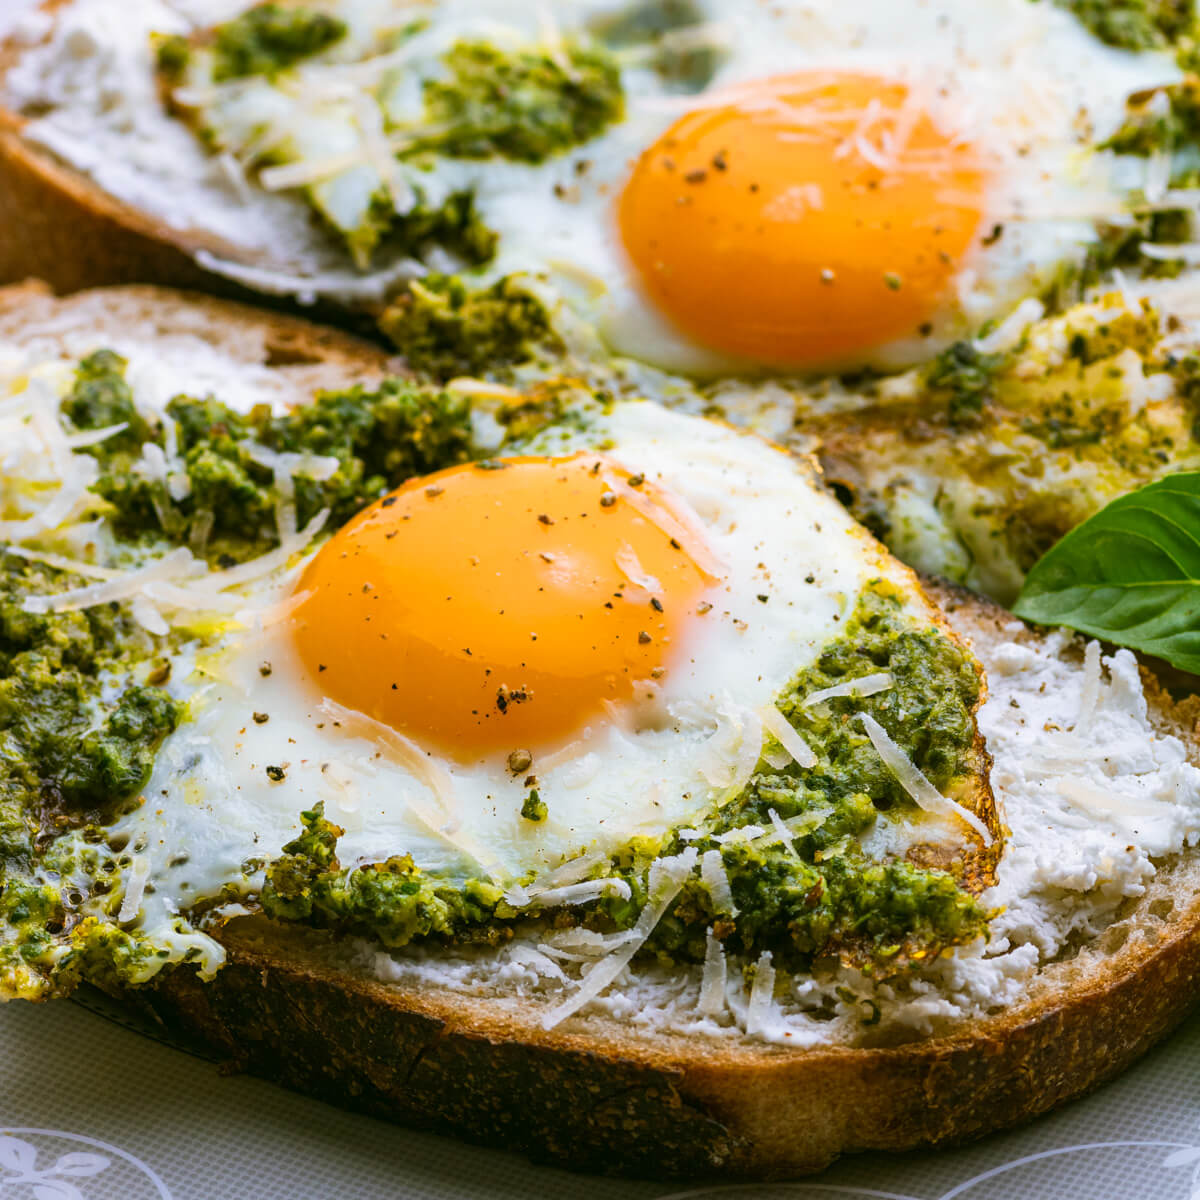 Two fried Pesto Eggs on toast with sunny side up yellow egg yolks and vibrant green basil pesto.